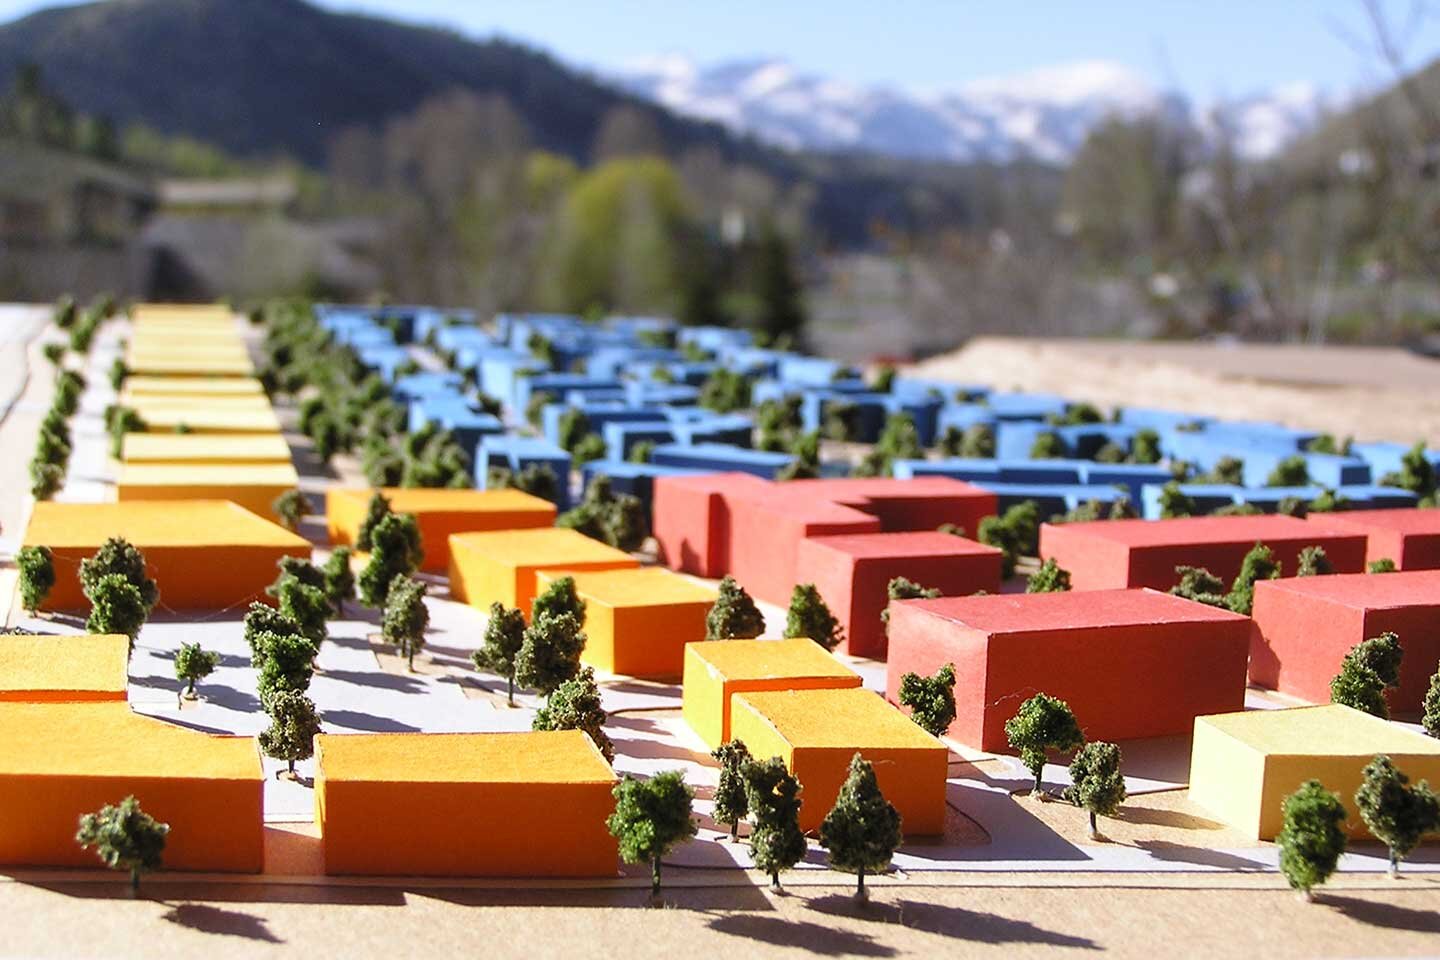 Real 3D model with colorful boxes on location